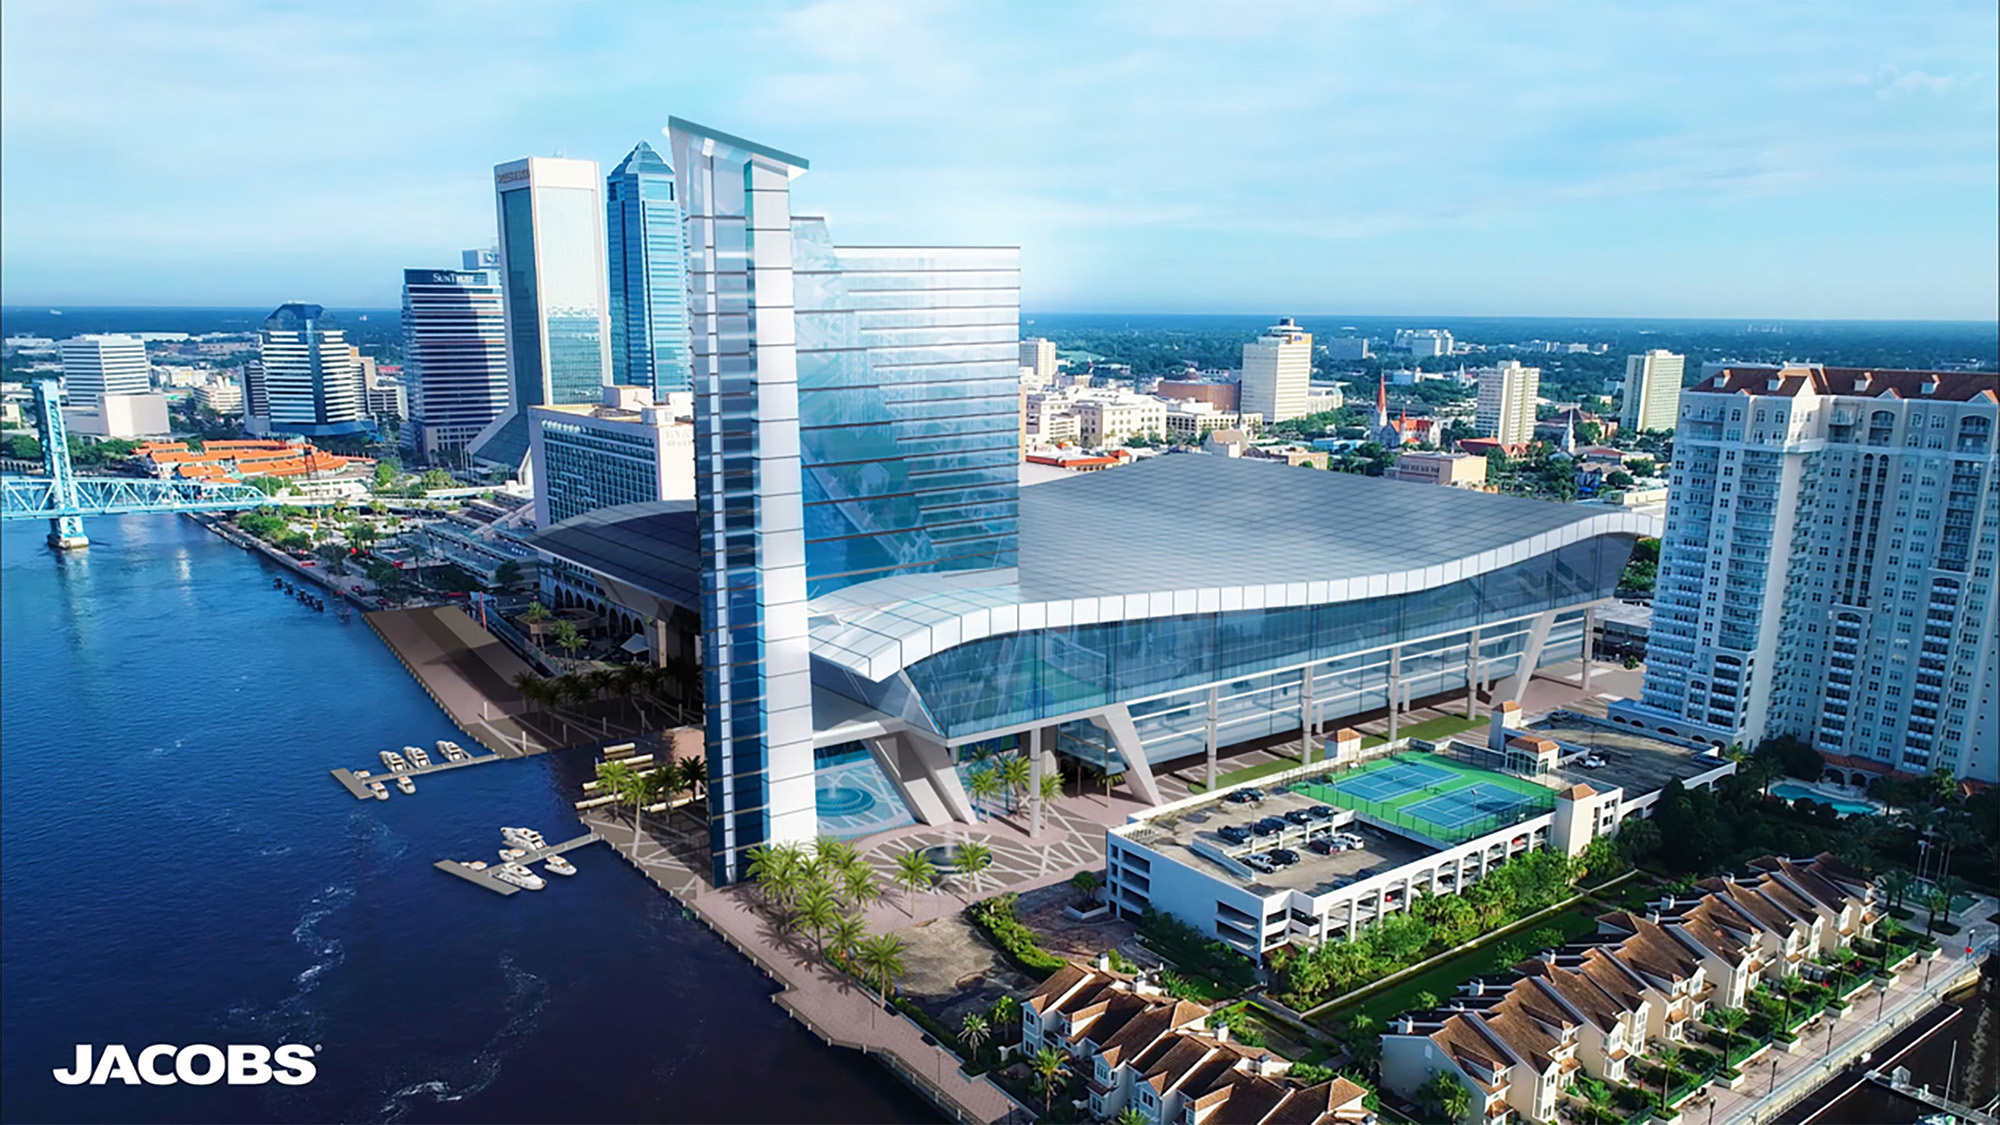 An unsolicited proposal by Jacobs Development for a $550 million convention center at The Ford on Bay did not gain the endorsement Jan. 6 of a City Council Special Committee on Downtown Development.